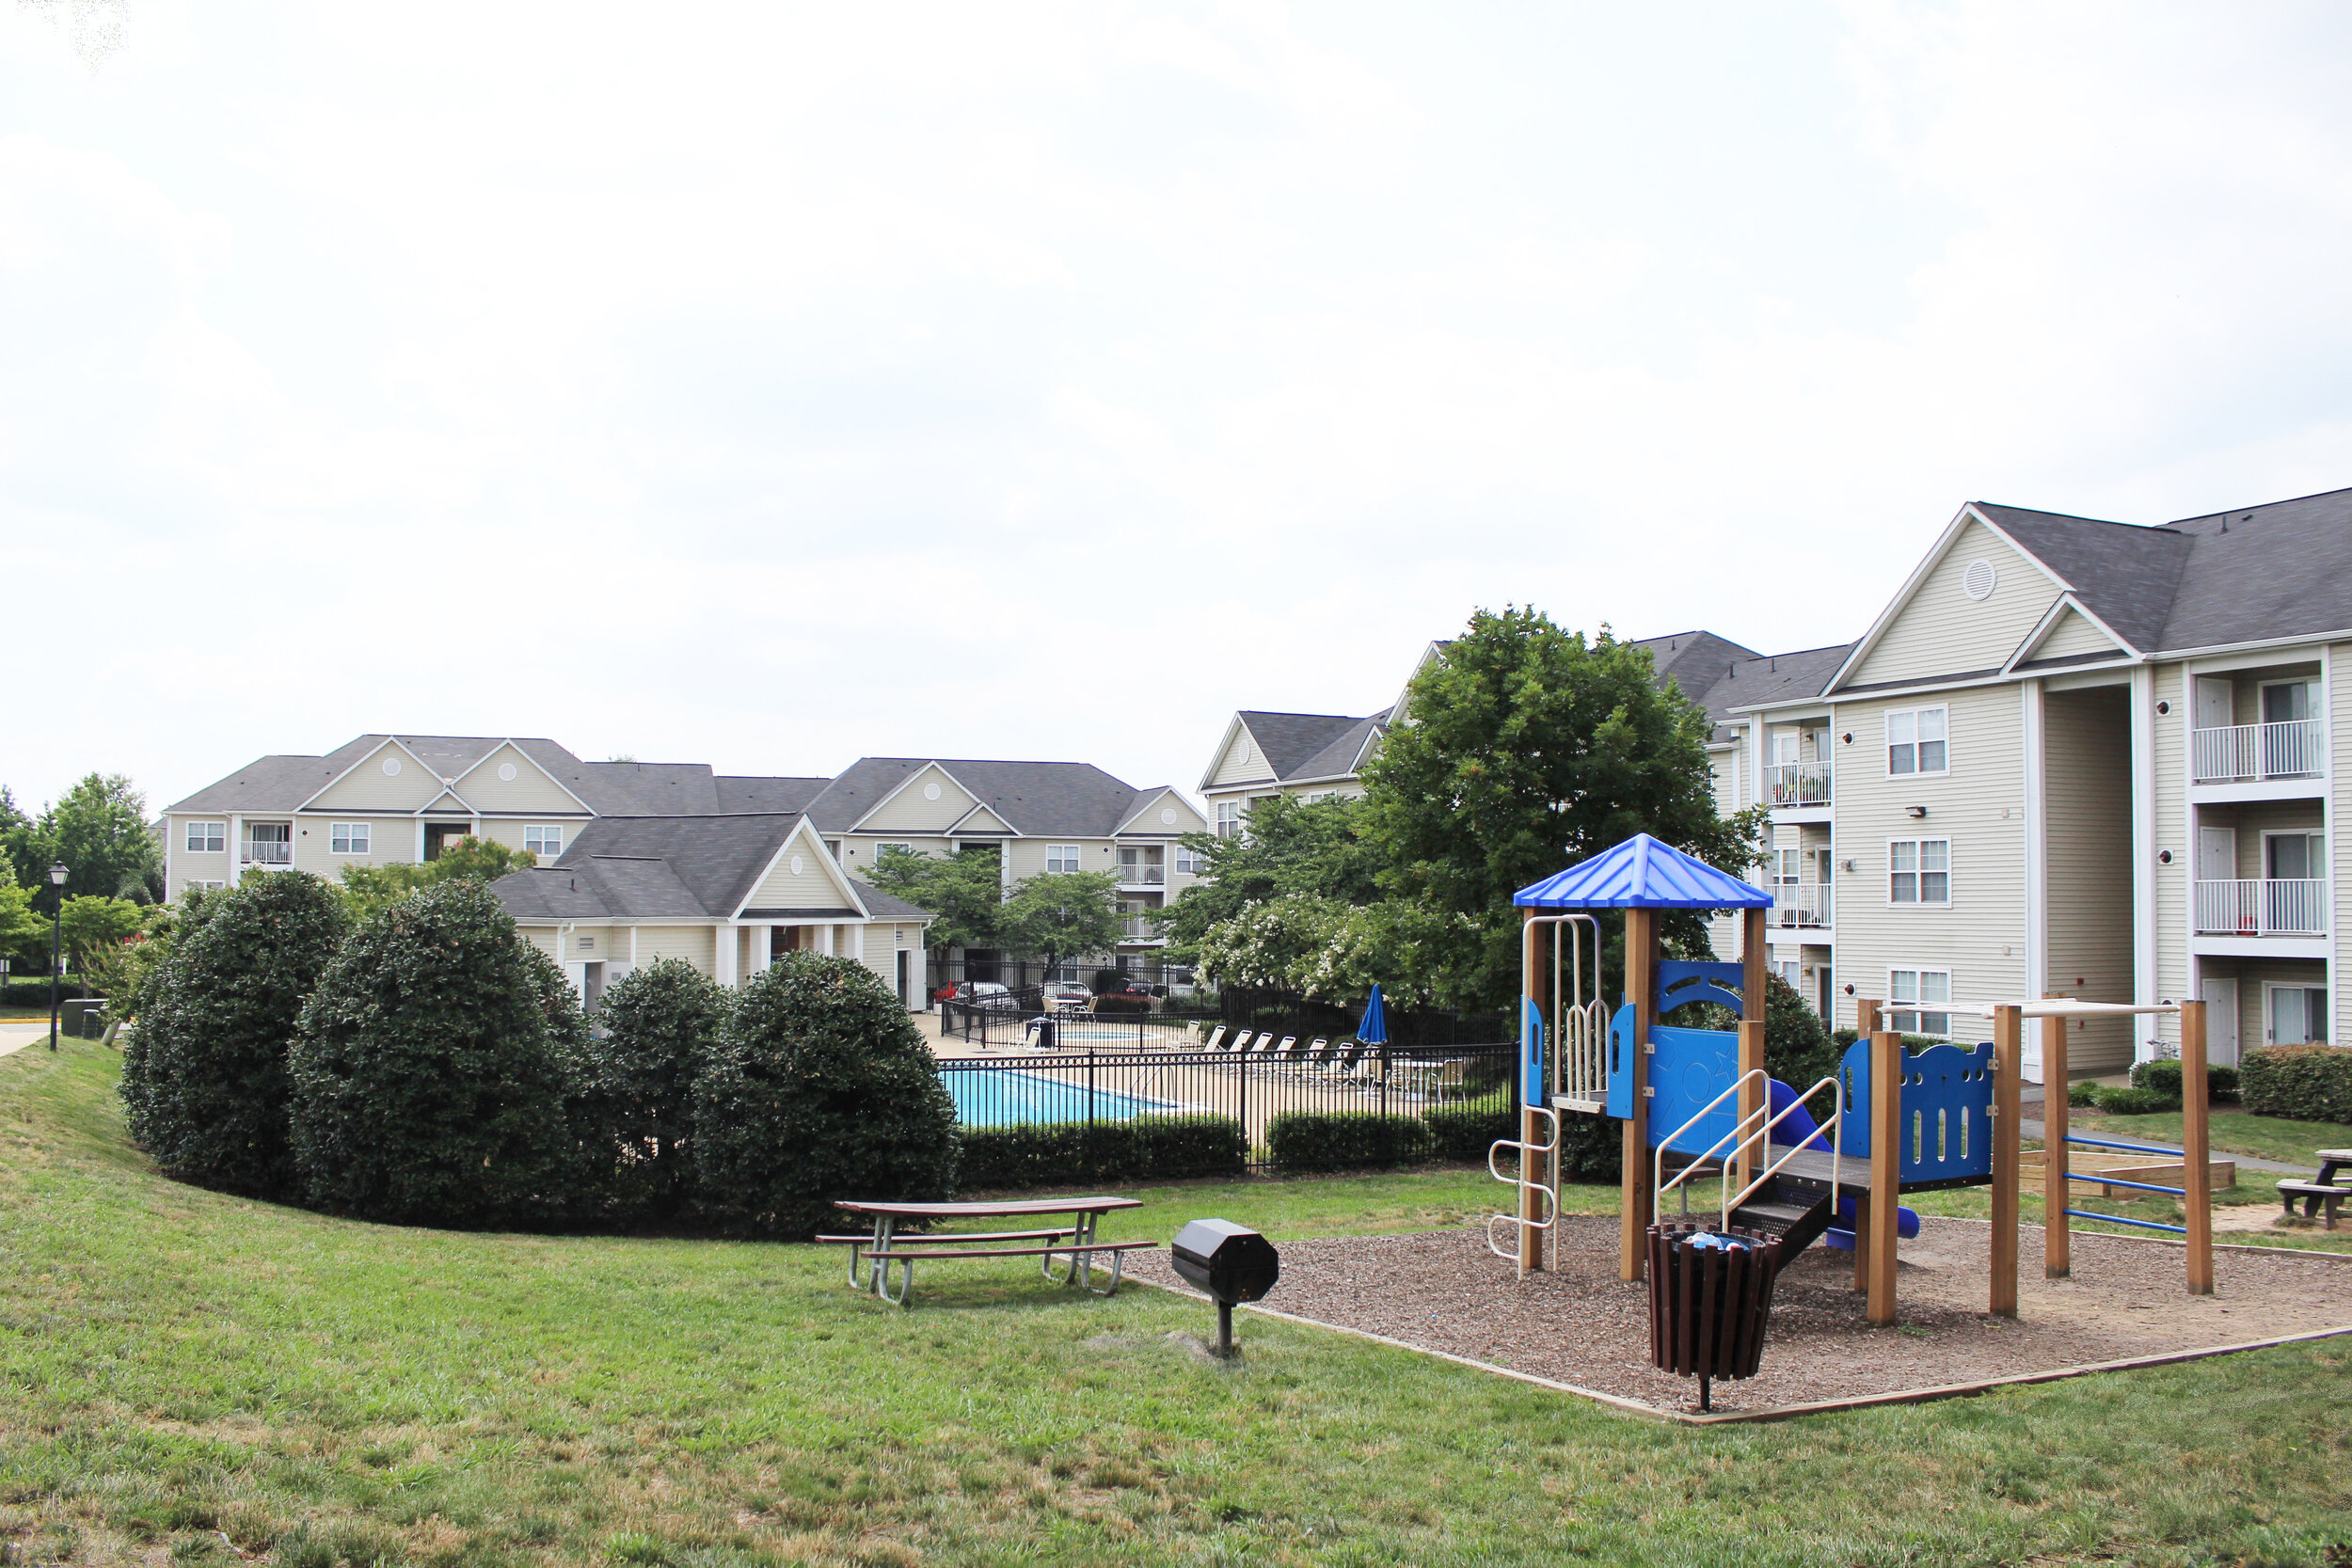  Potomac Station Apartments in Loudoun County, VA feature mature trees and open green spaces.  